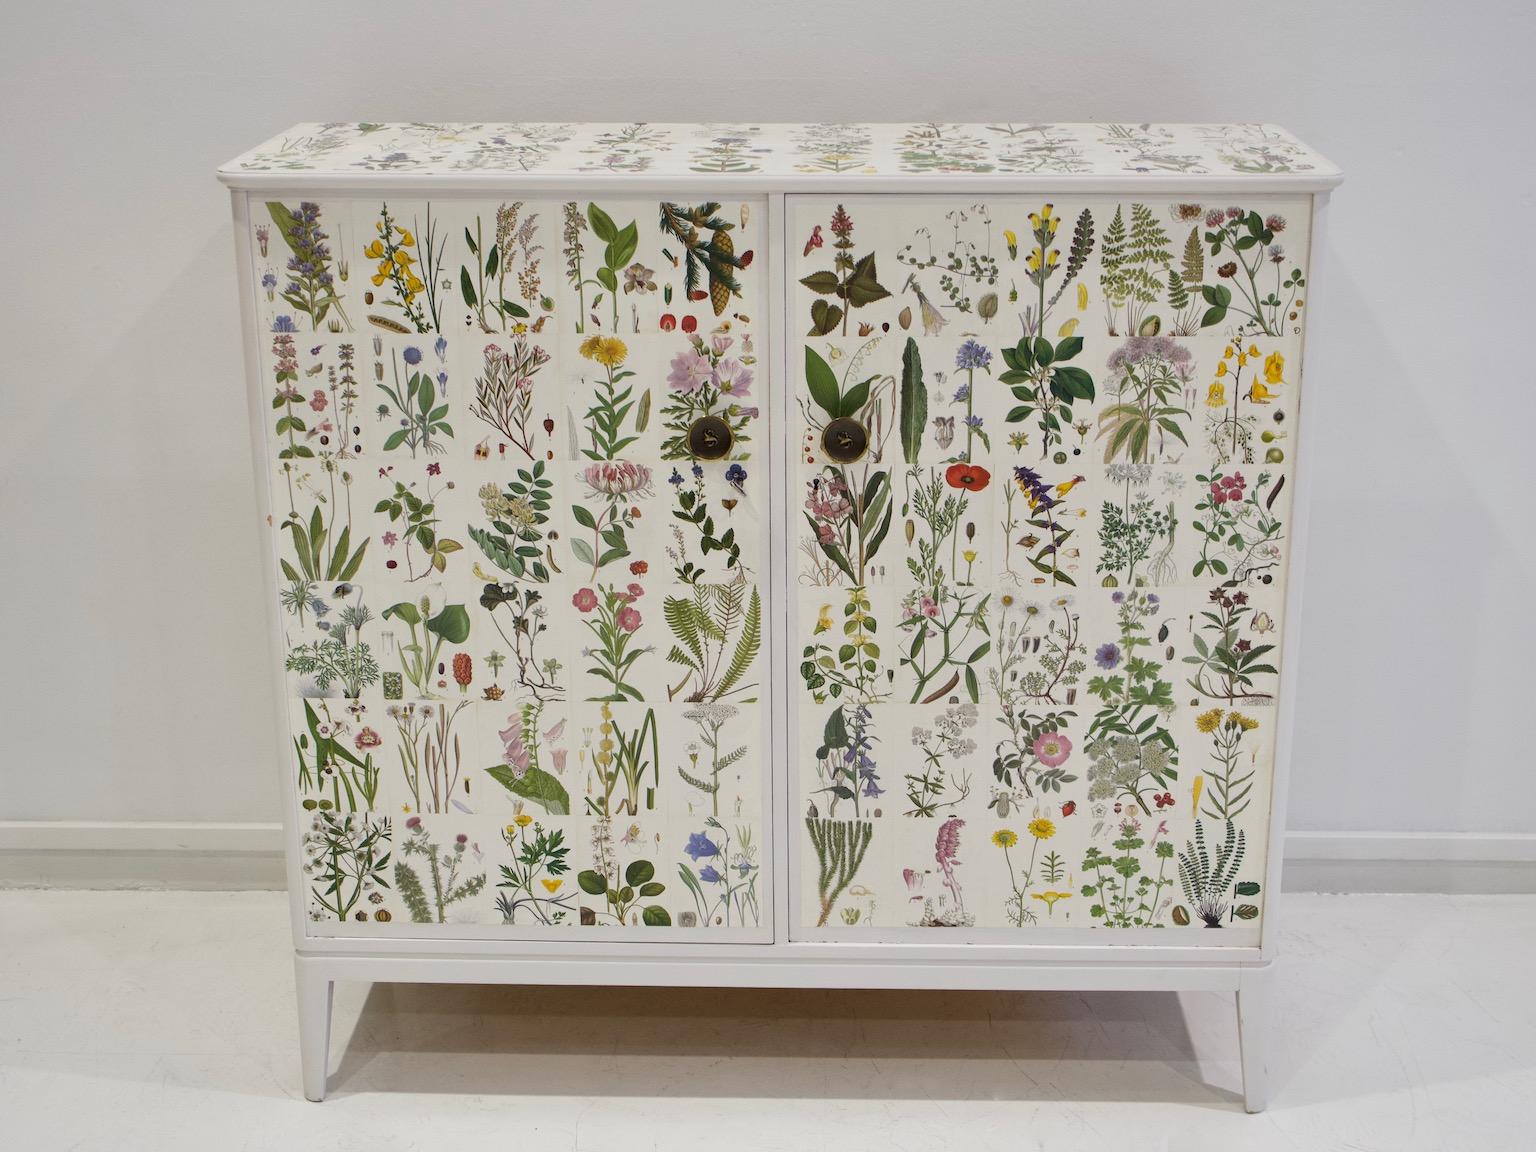 White painted wooden cabinet decorated with illustrations from the book 